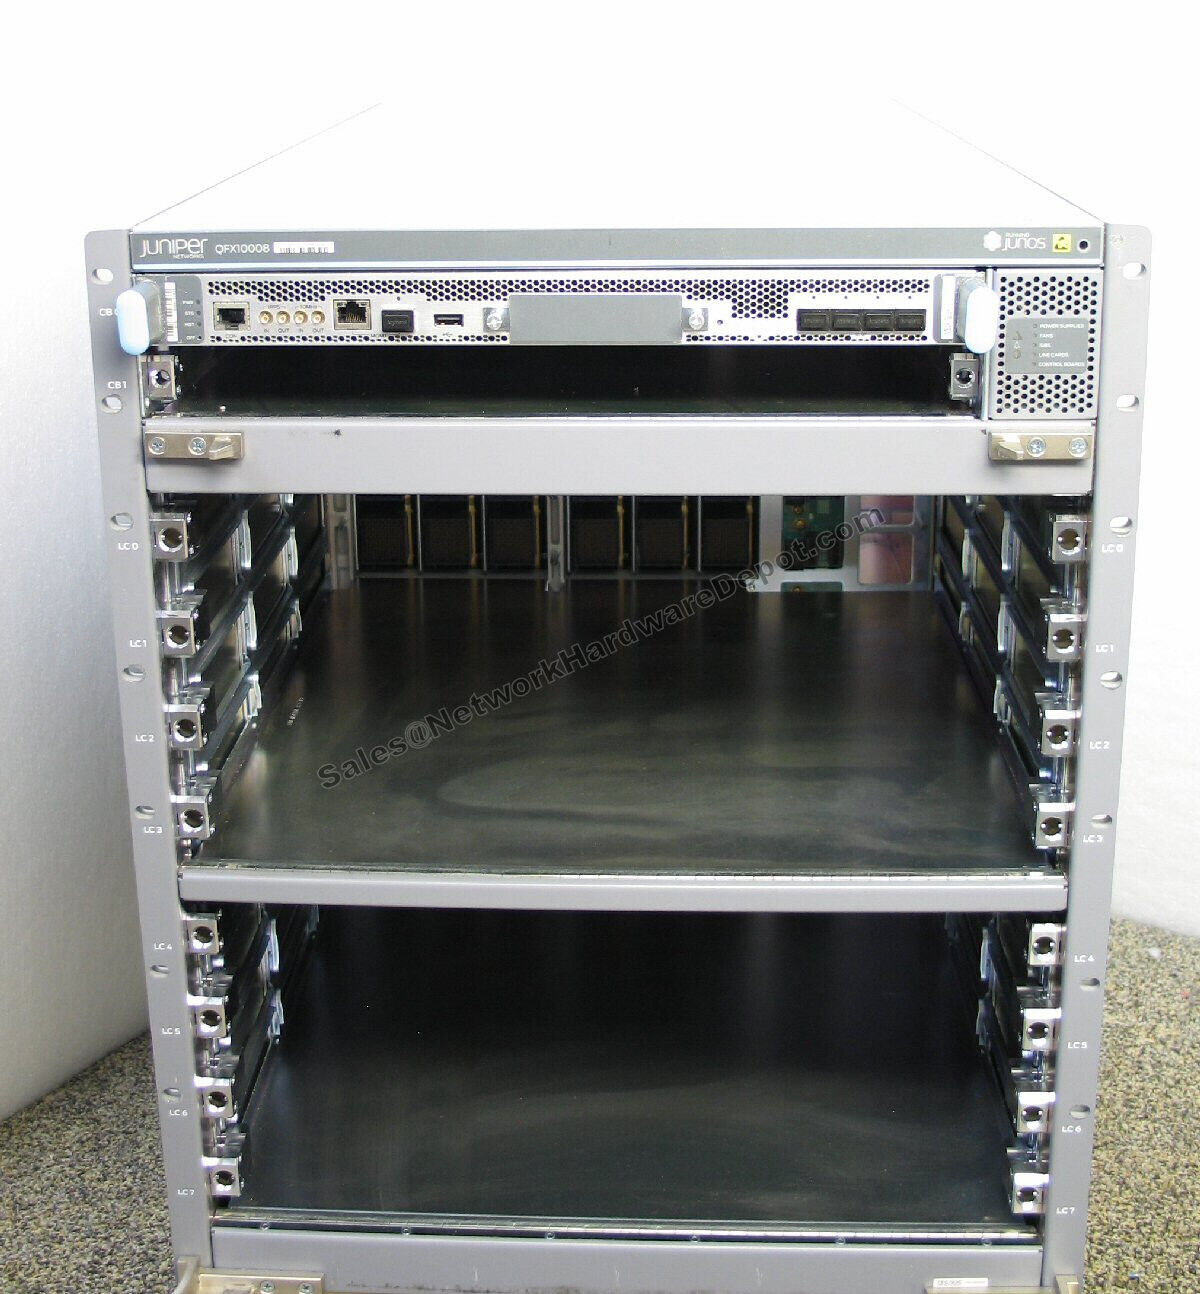 Juniper Networks QFX10008 8-Slot Chassis w/ QFX10000-RE & PWR *1 Year Warranty*